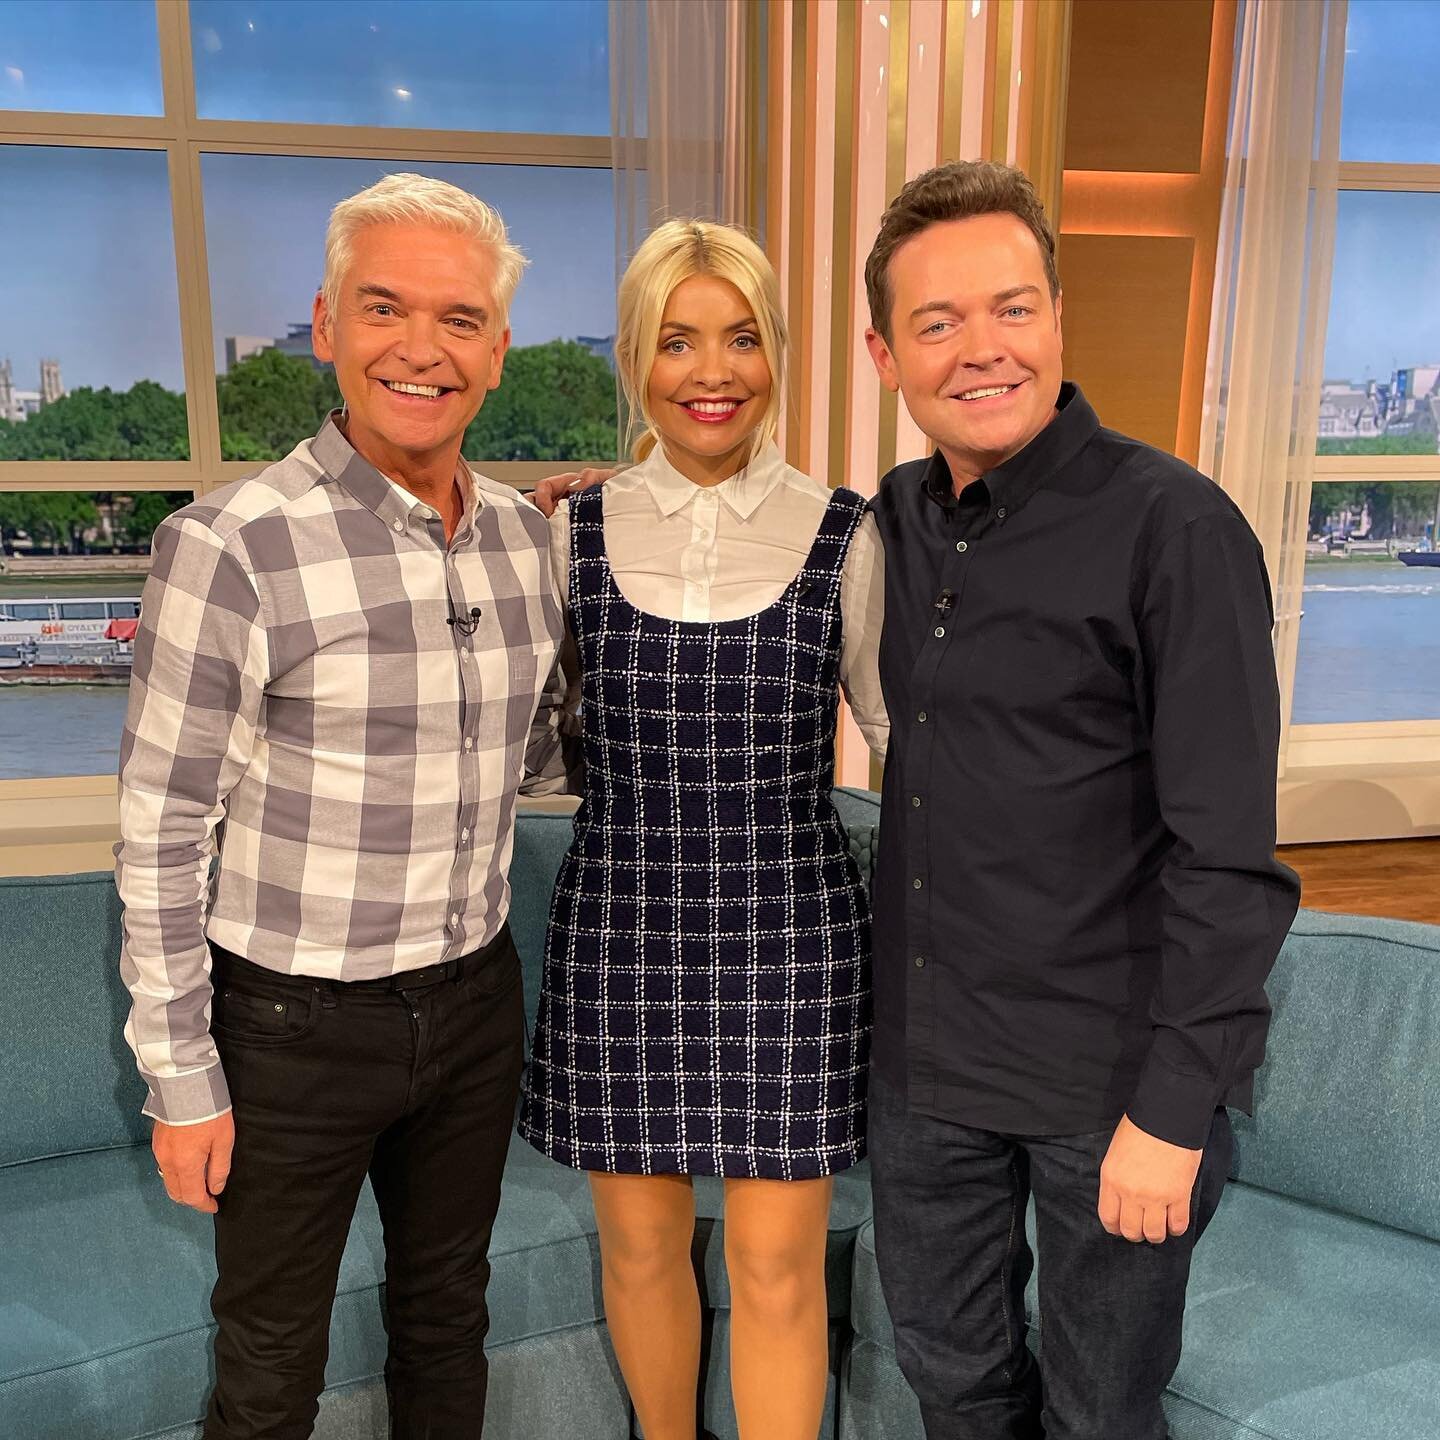 Stephen joined @hollywilloughby and Phil Schofield on todays @thismorning talking all about Max Magic 🎩🪄📚

Available now! 📚🐰

#stephenmulhern #magic #magictricks #magicshow #hollywilloughby #philipschofield #thismorning #books #book #reading #ch